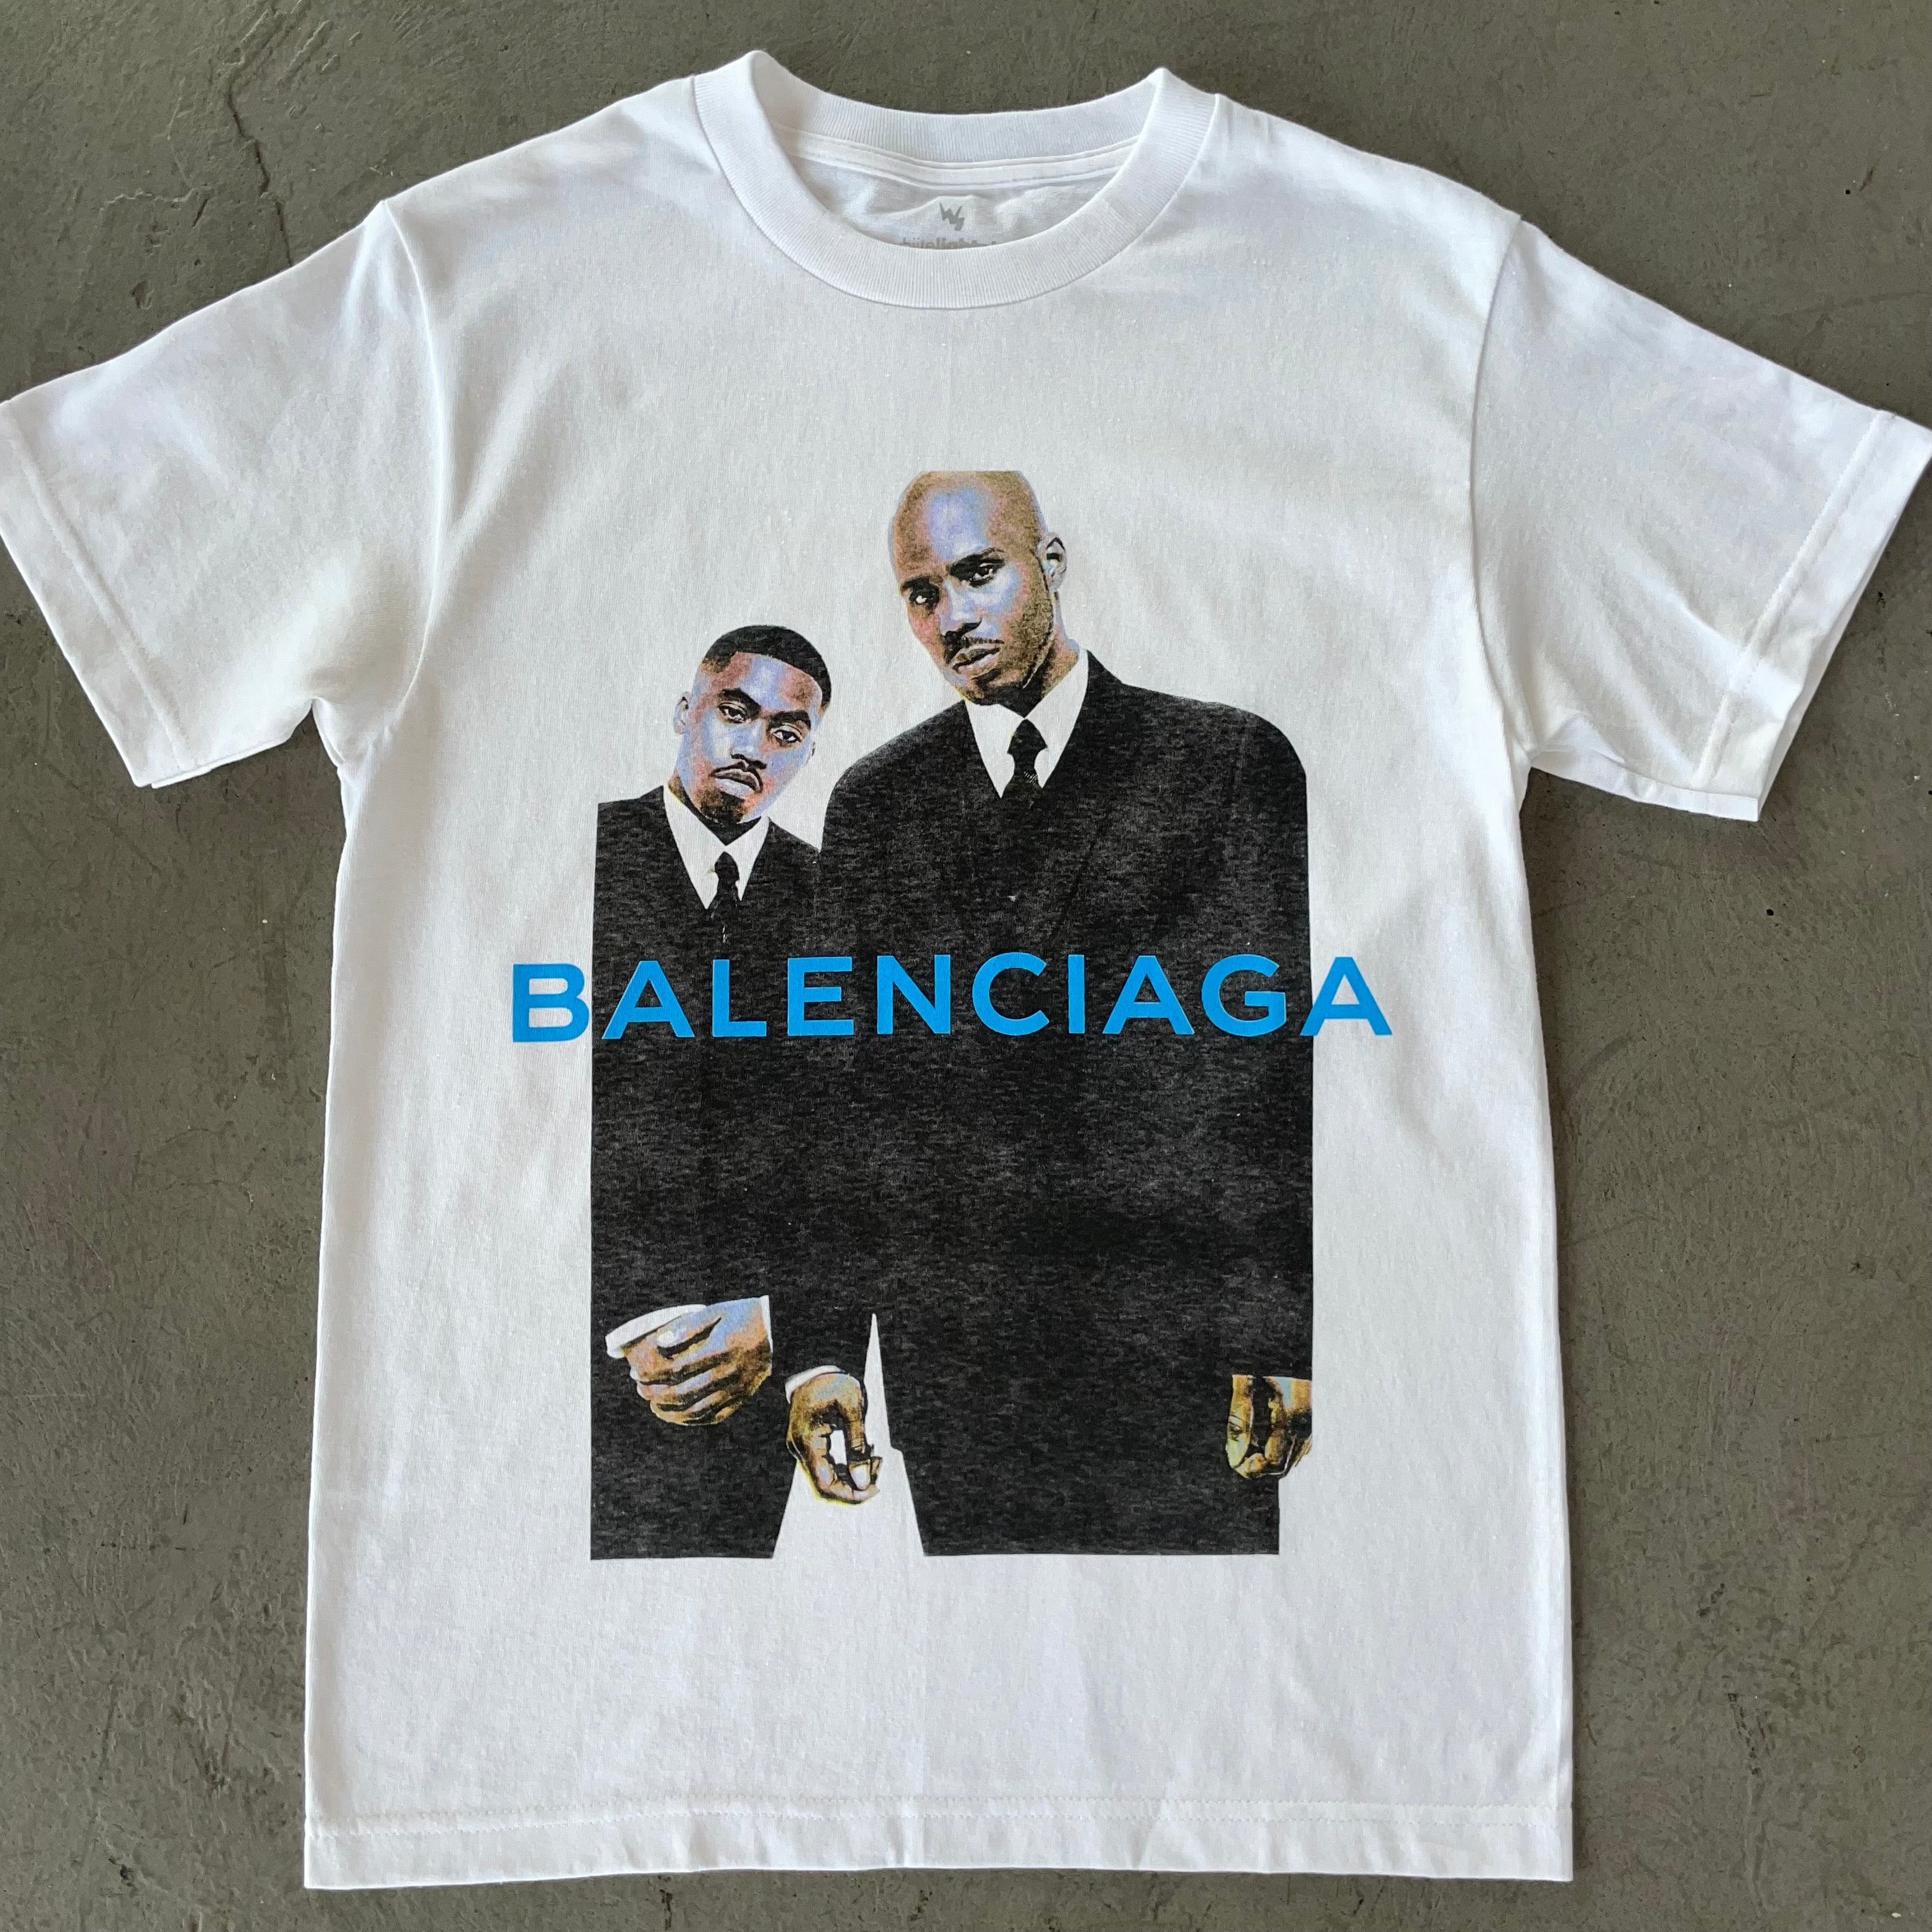 Balenciaga Short Sleeve Solid T-Shirts for Men for sale